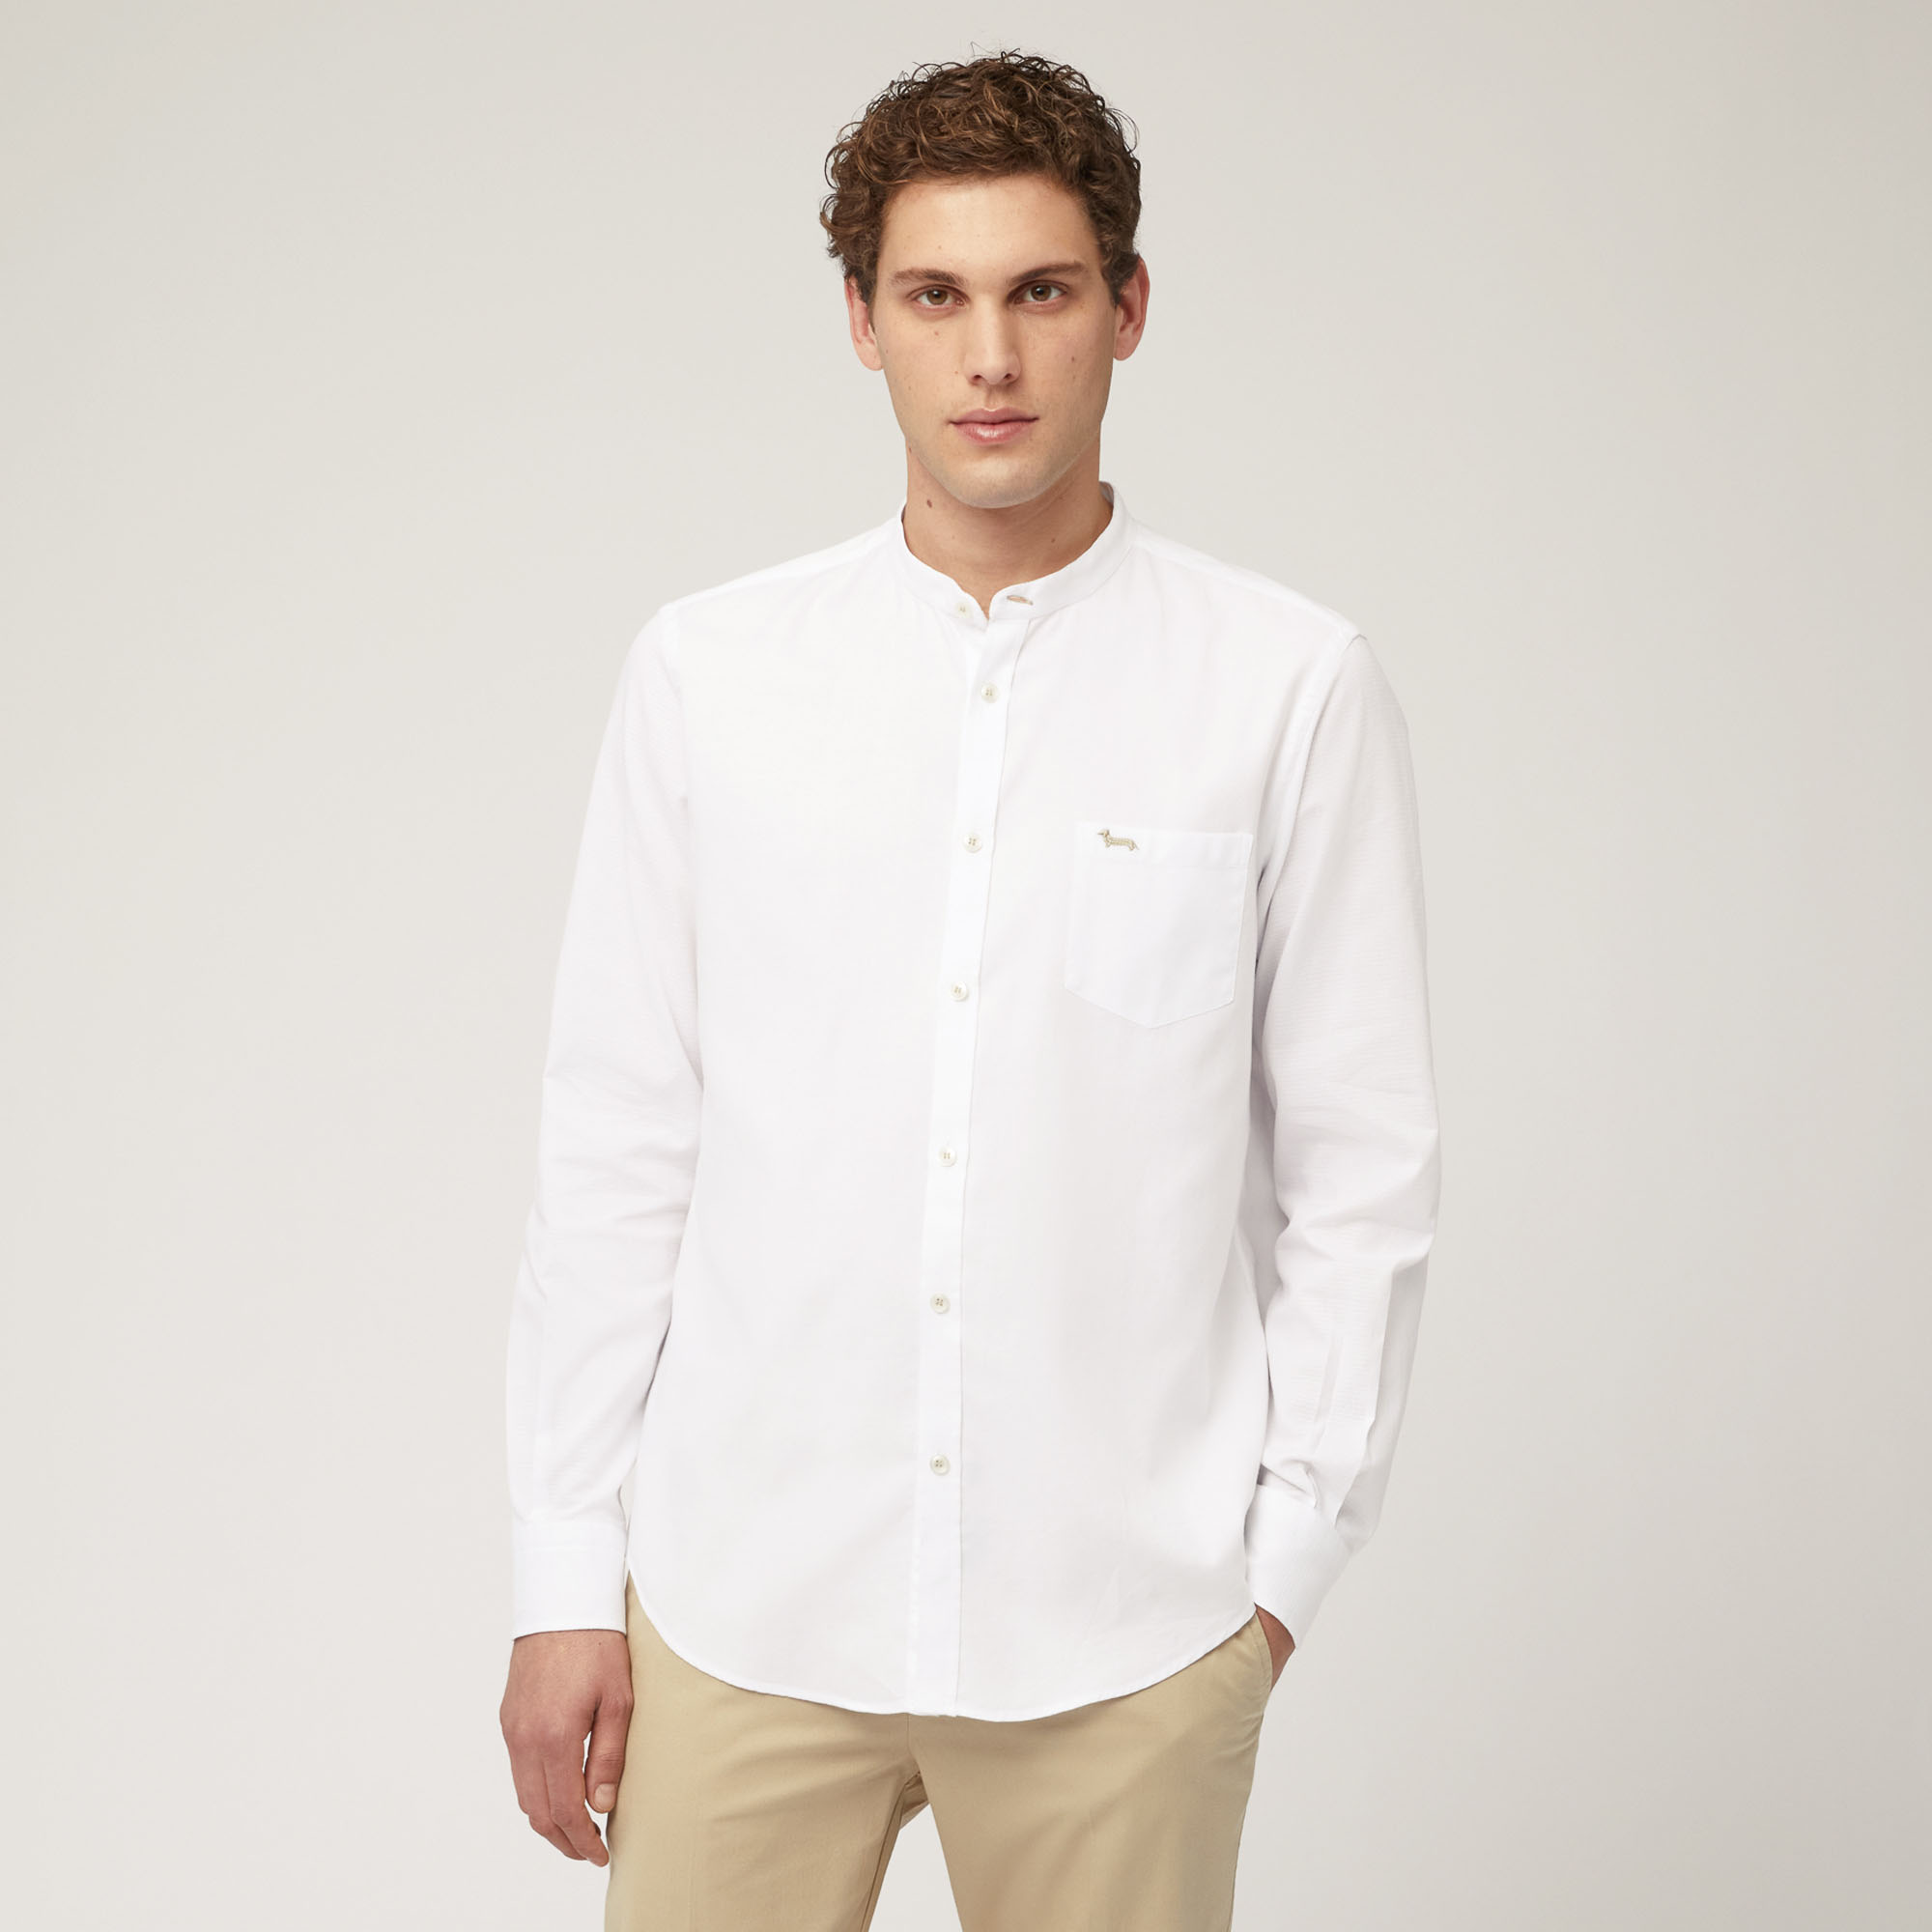 Woven Cotton Shirt with Mandarin Collar and Breast Pocket, White, large image number 0